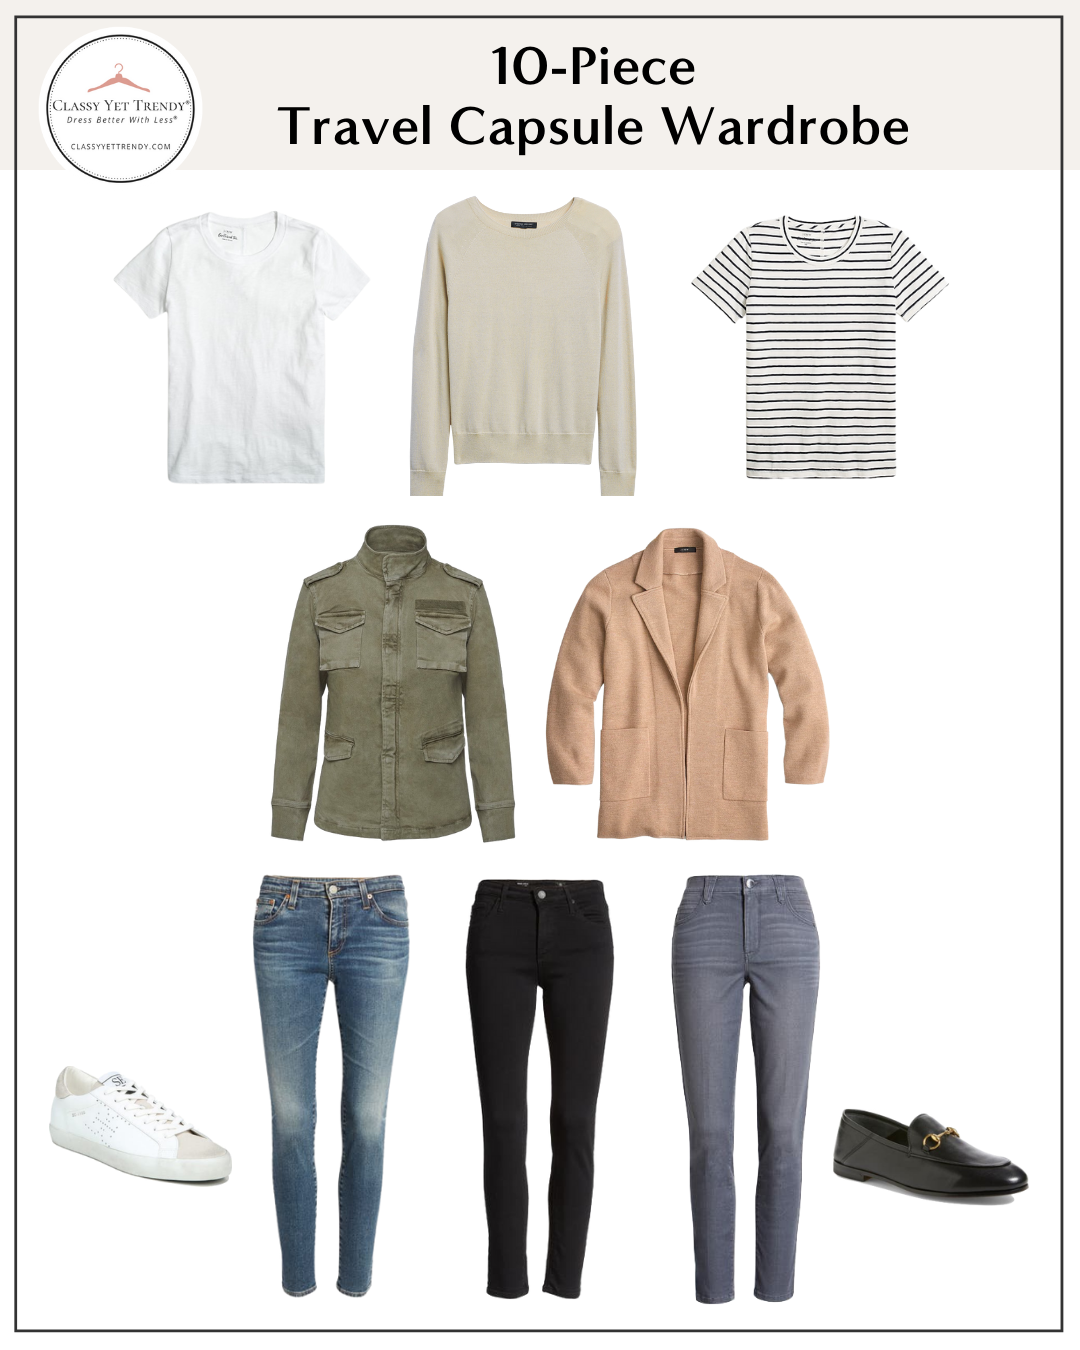 10-Piece Travel Capsule Wardrobe: What I Wore On Our Smoky Mountains  Vacation - Classy Yet Trendy